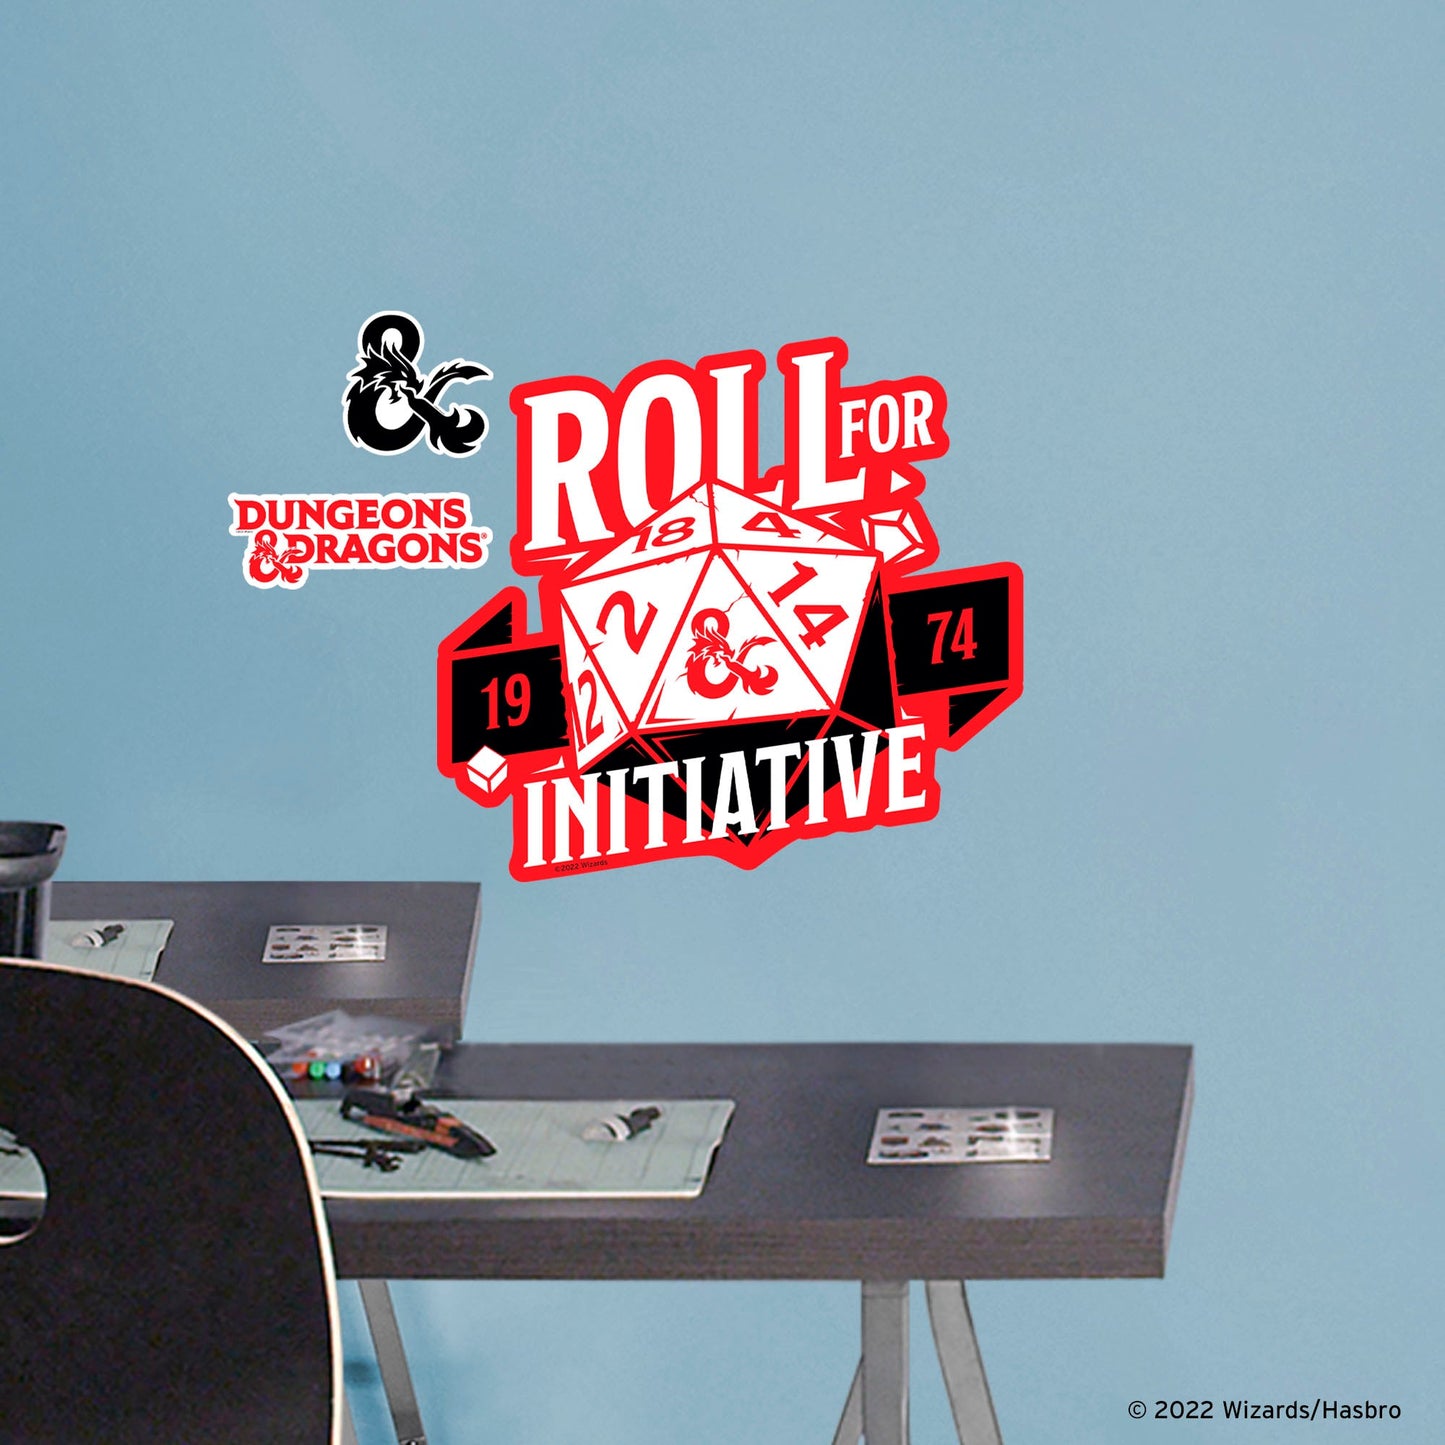 Dungeons & Dragons: Roll For Initiative Icon - Officially Licensed Hasbro Removable Adhesive Decal